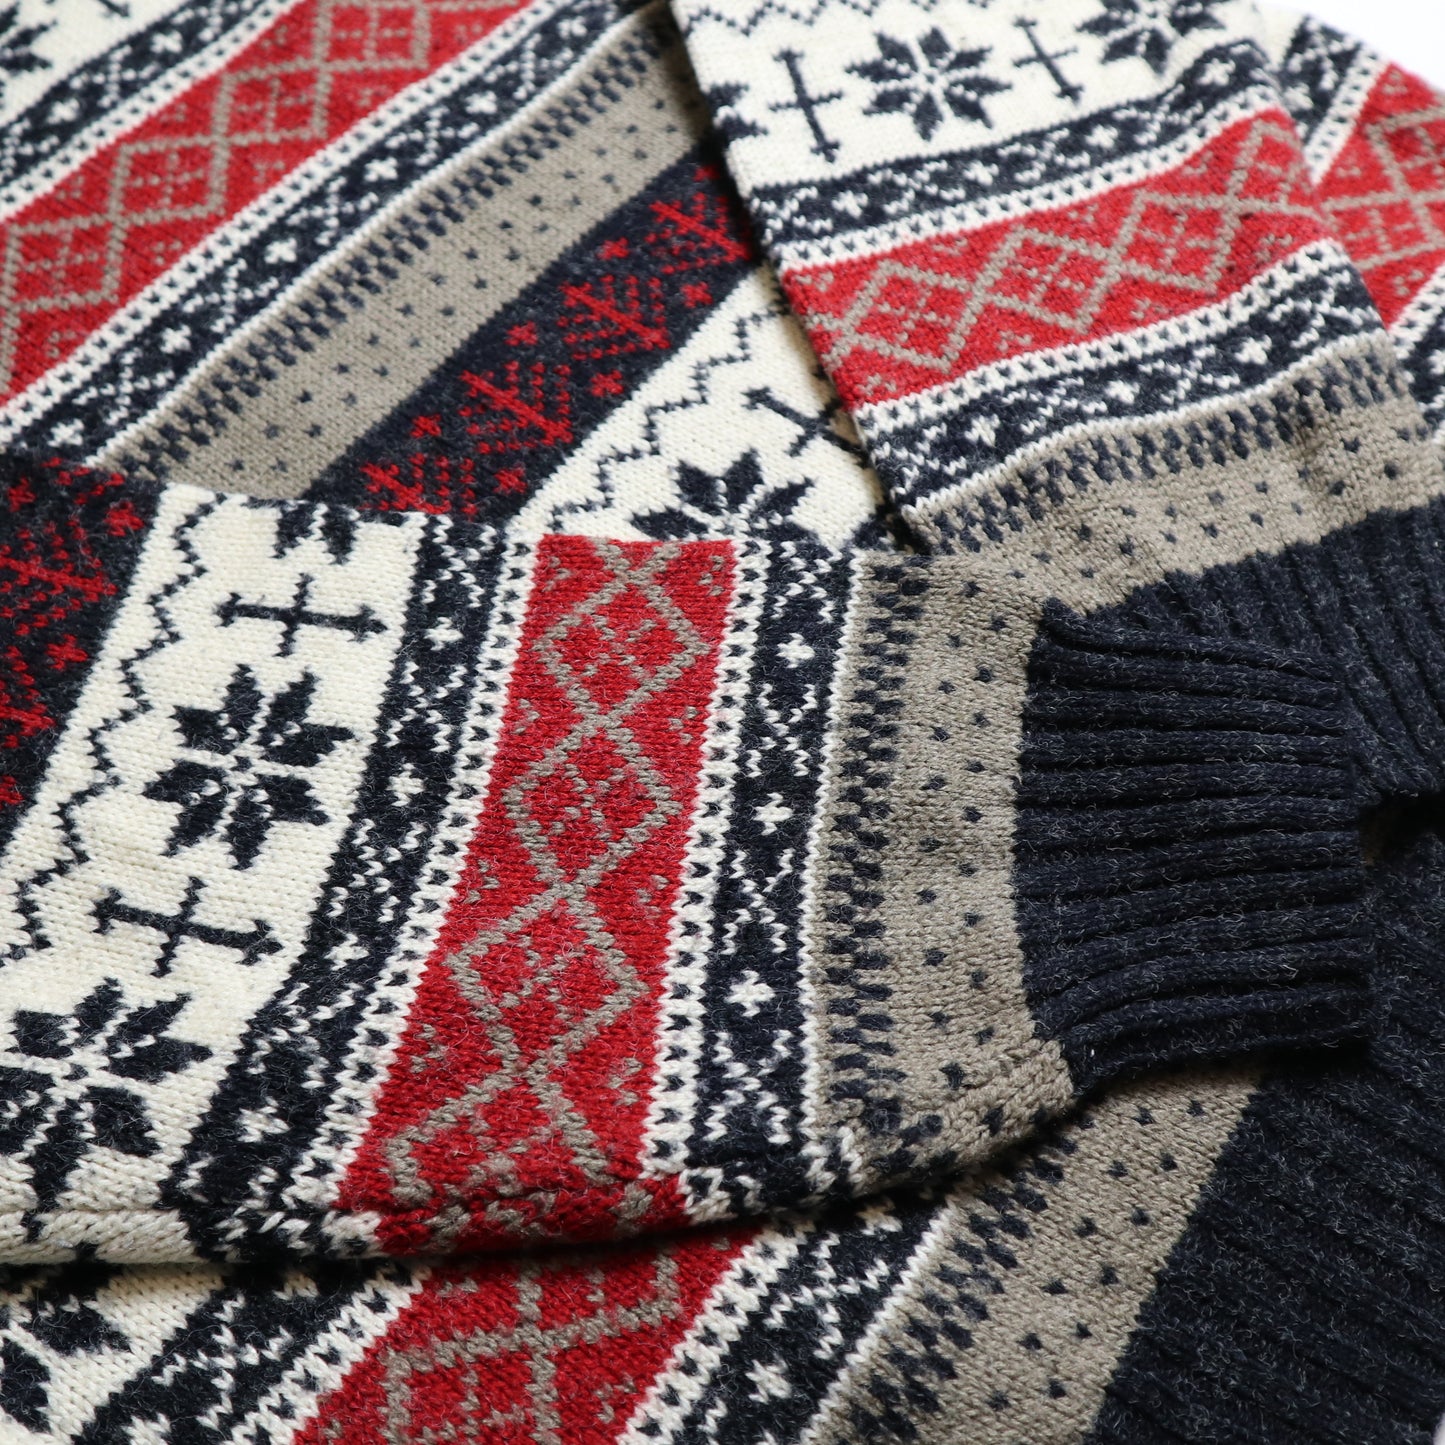 90s contrasting snowflake totem sweater Christmas sweater